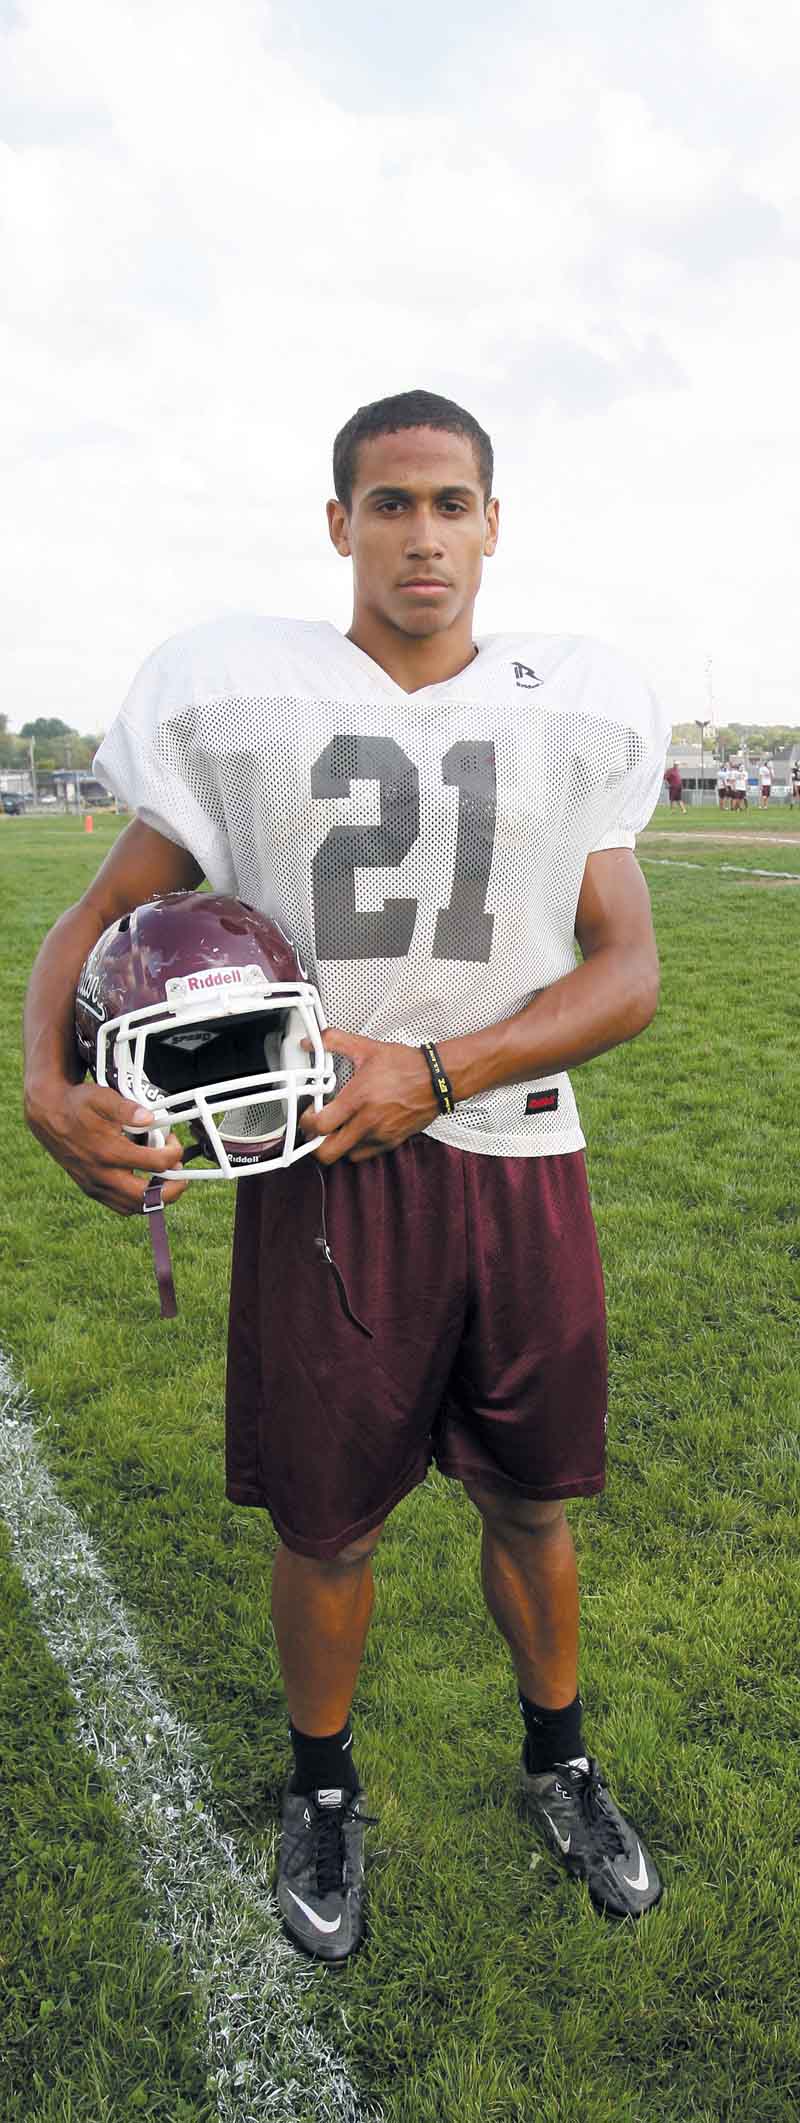 Boardman High running back Devin Campbell has racked up 718 yards rushing and 234 receiving for the Spartans so far this season. He also plays cornerback on defense.